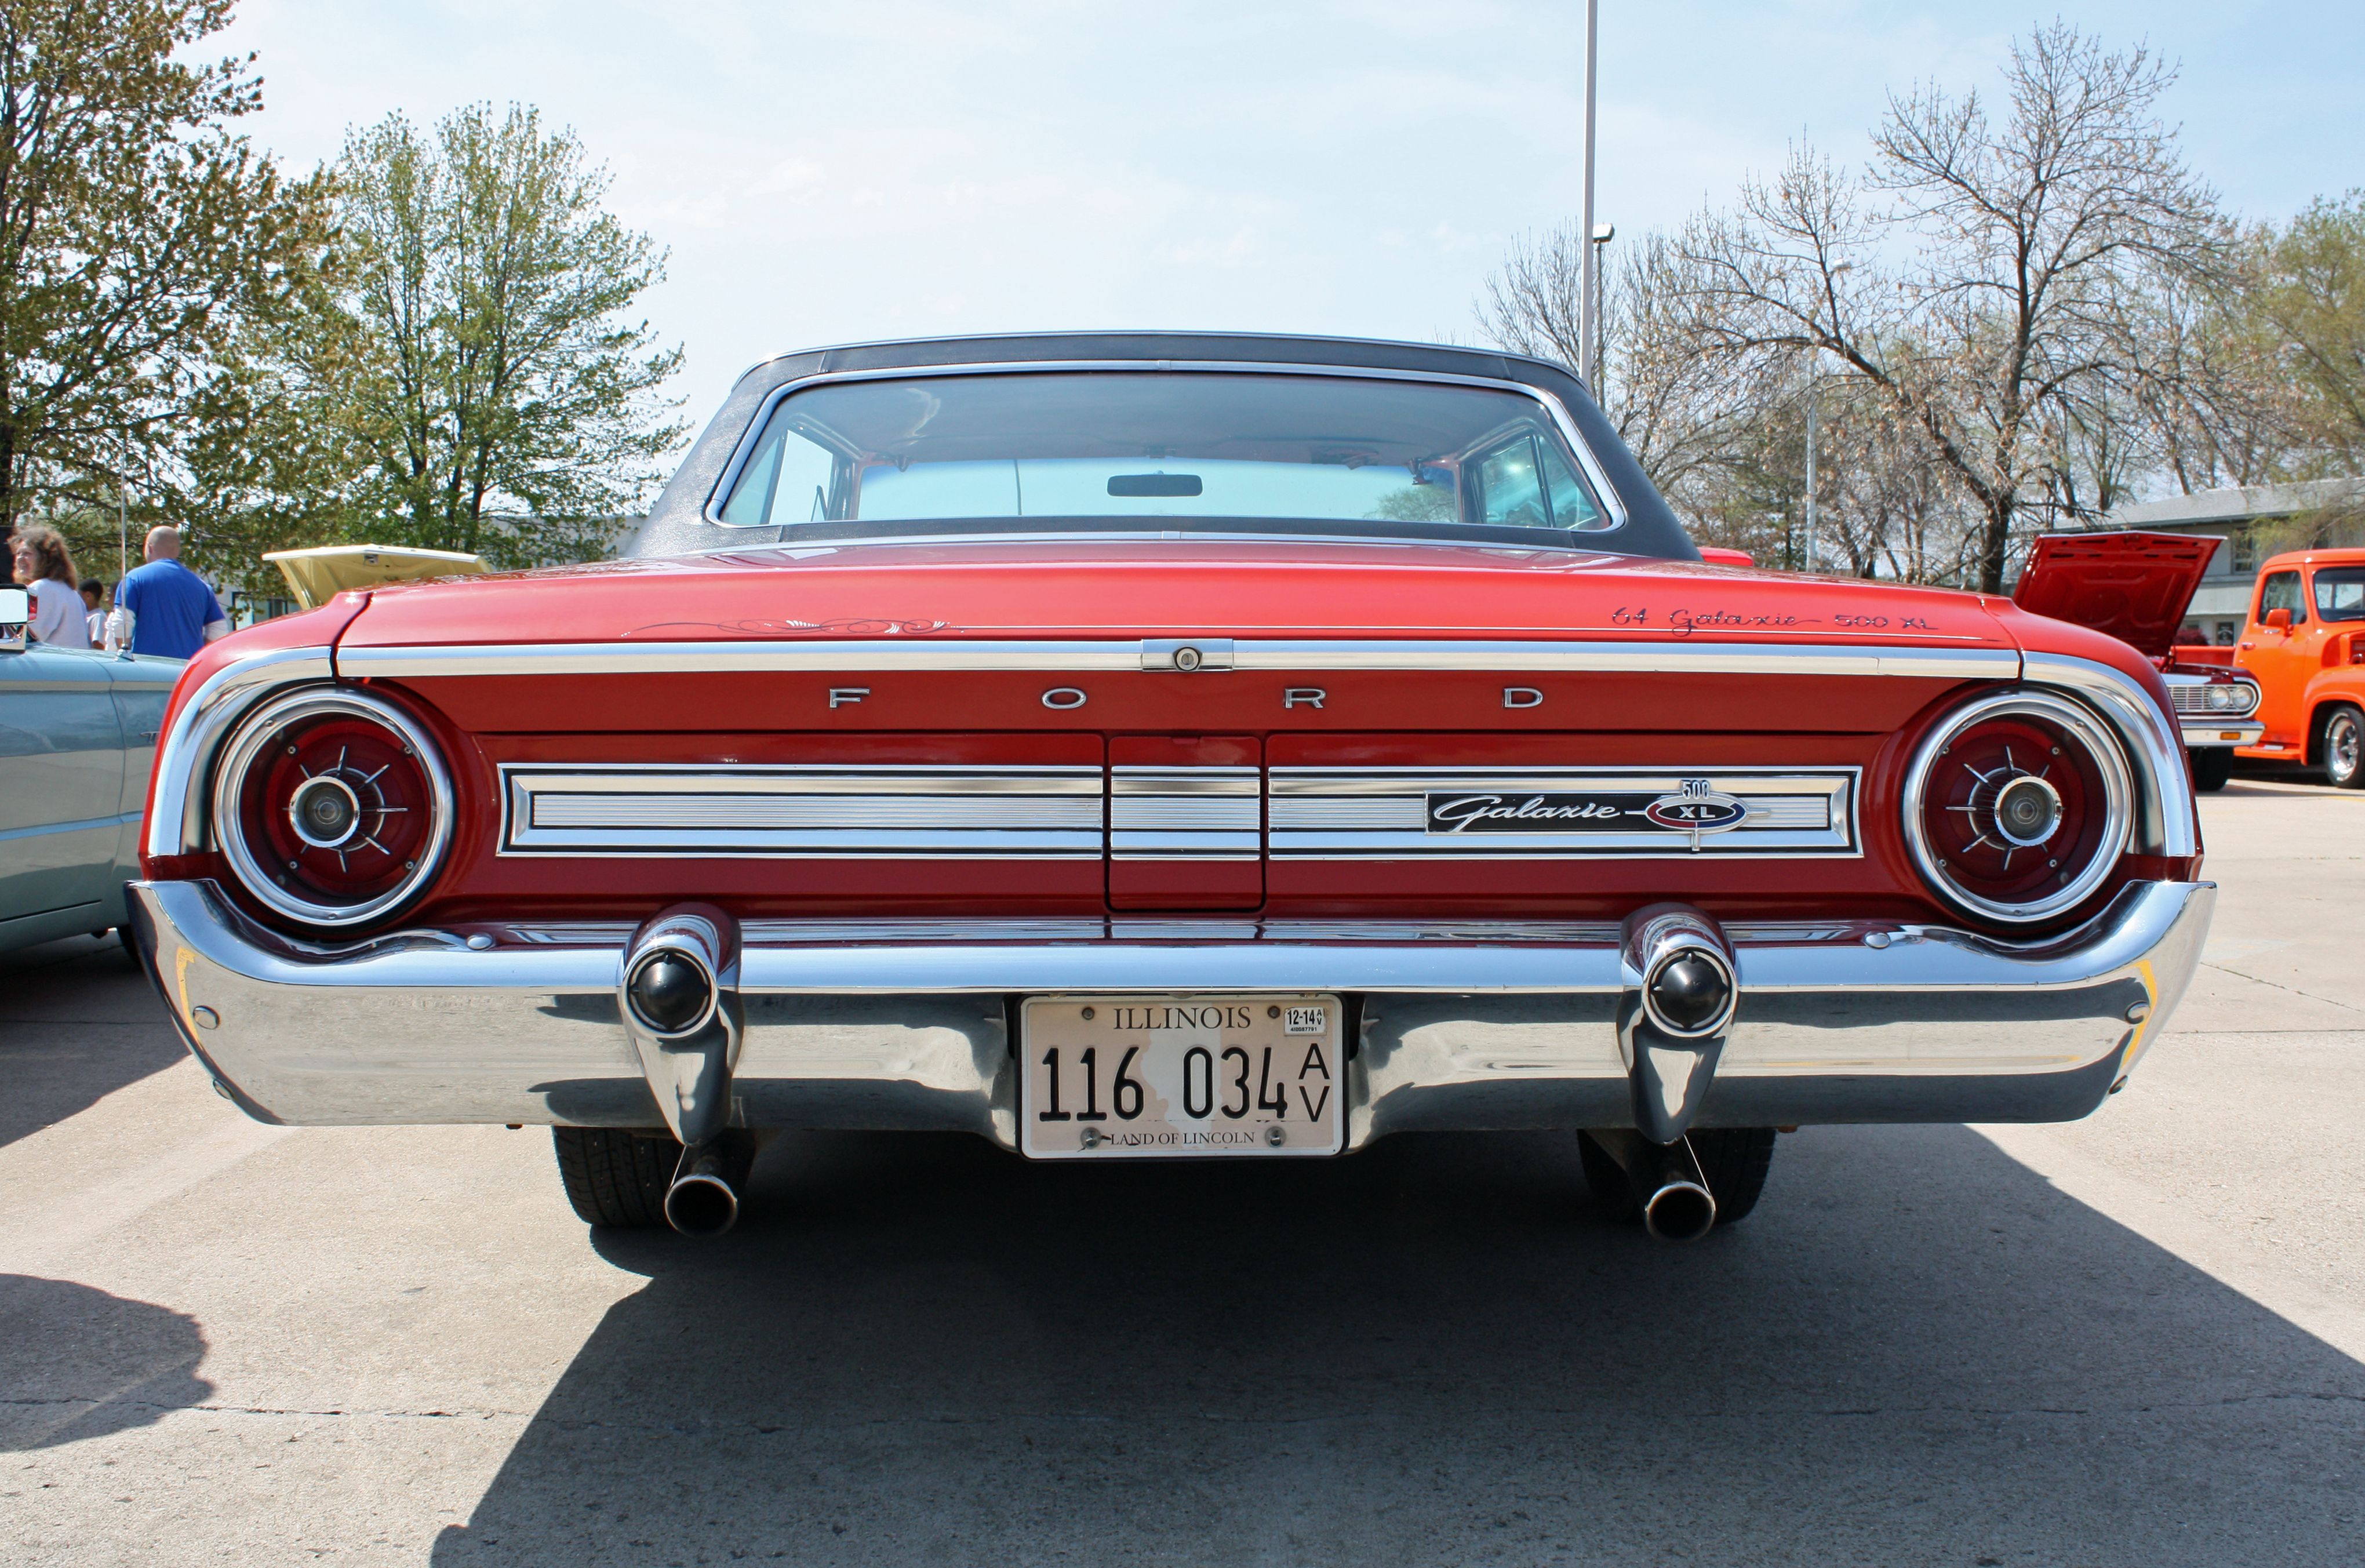 Ford Galaxie 500 4k Ultra HD Wallpaper. Background Image